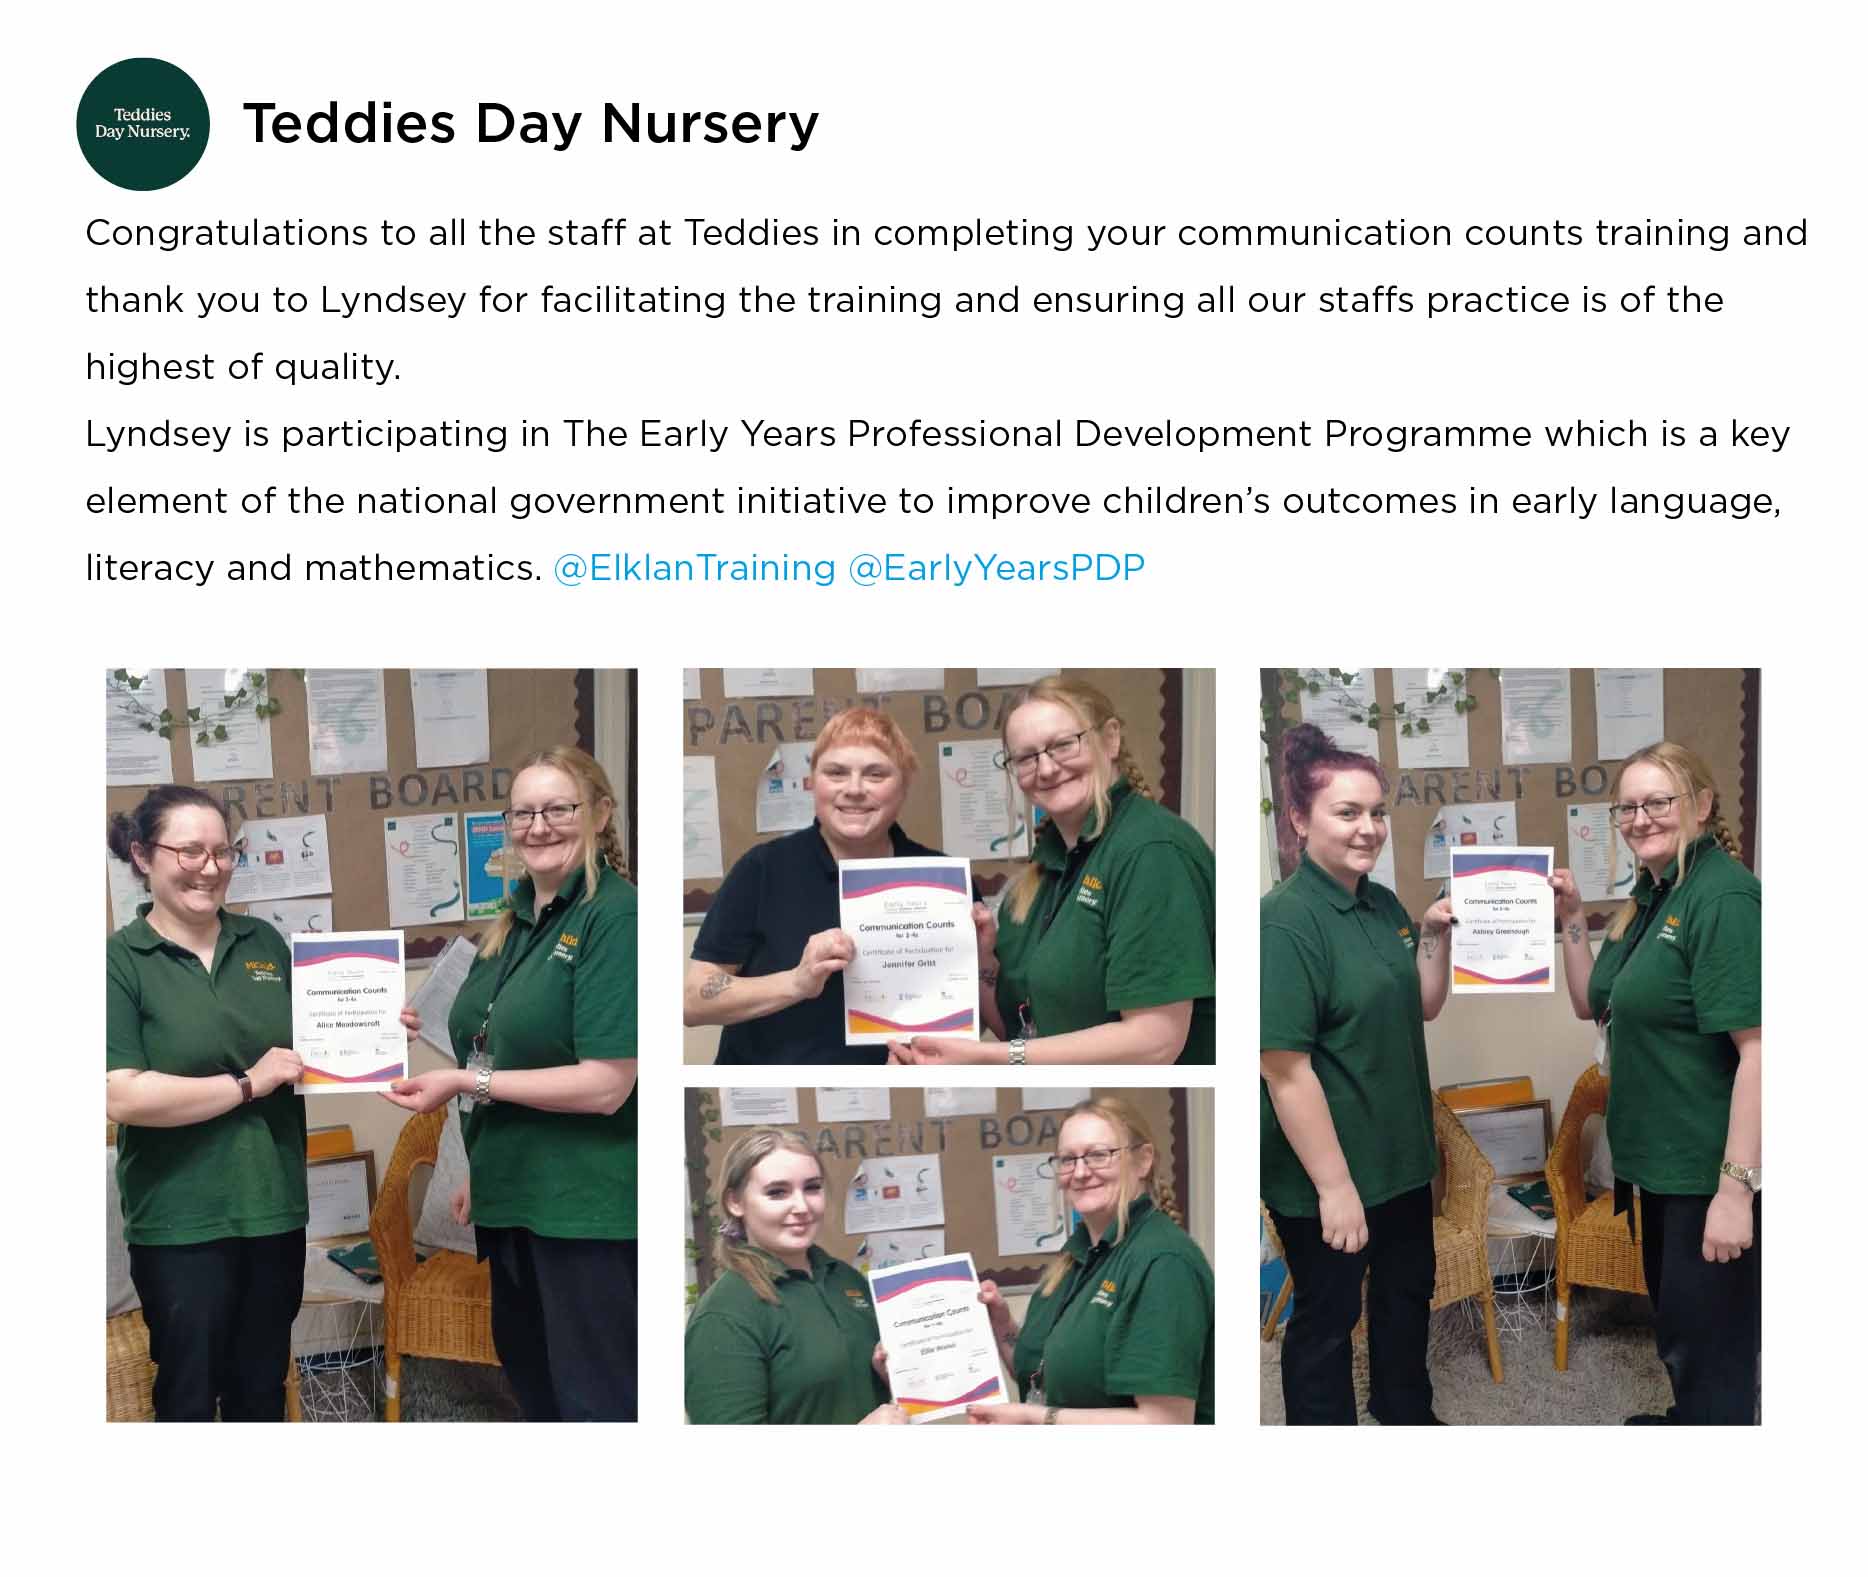 Teddies Day Nursery: Congratulations to all the staff at Teddies in completing your communication counts training and thank you to Lyndsey for facilitating the training and ensuring all our staffs practice is of the highest of quality. Lyndsey is participating in The Early Years Professional Development Programme which is a key element of the national government initiative to improve children's outcomes in early language, literacy and mathematics.